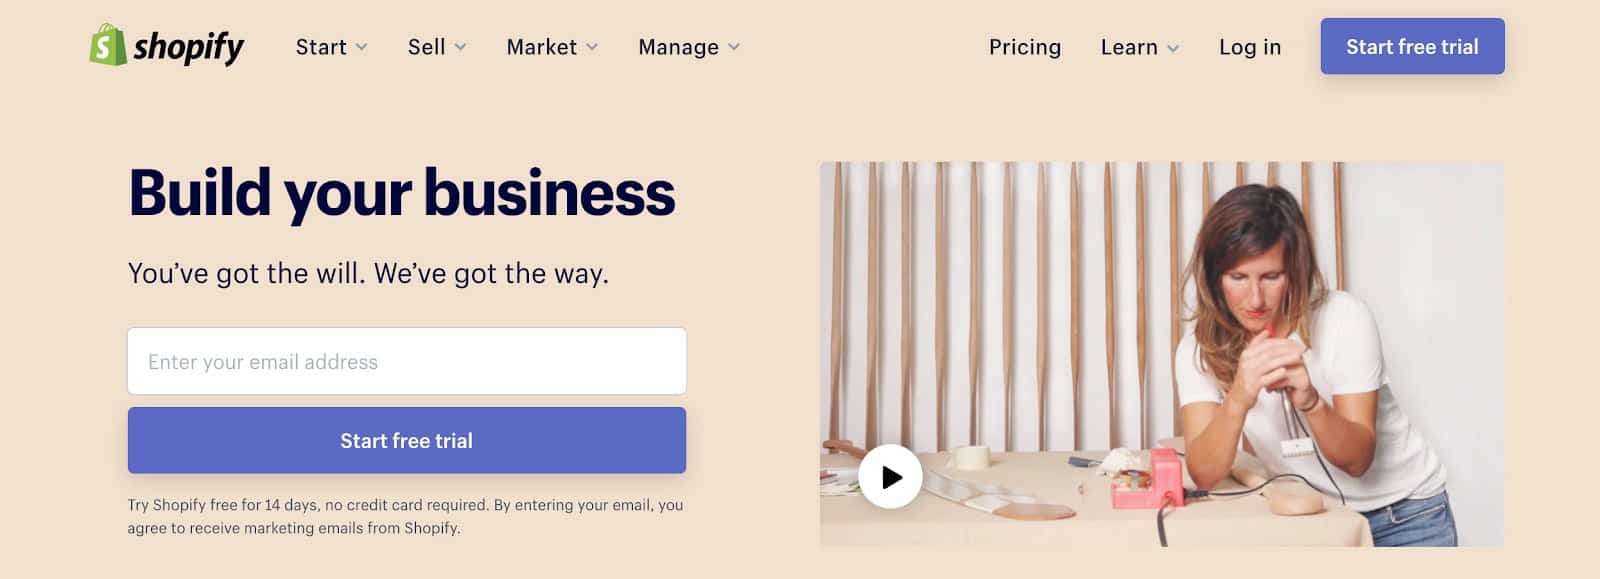 Shopify website | Build your business